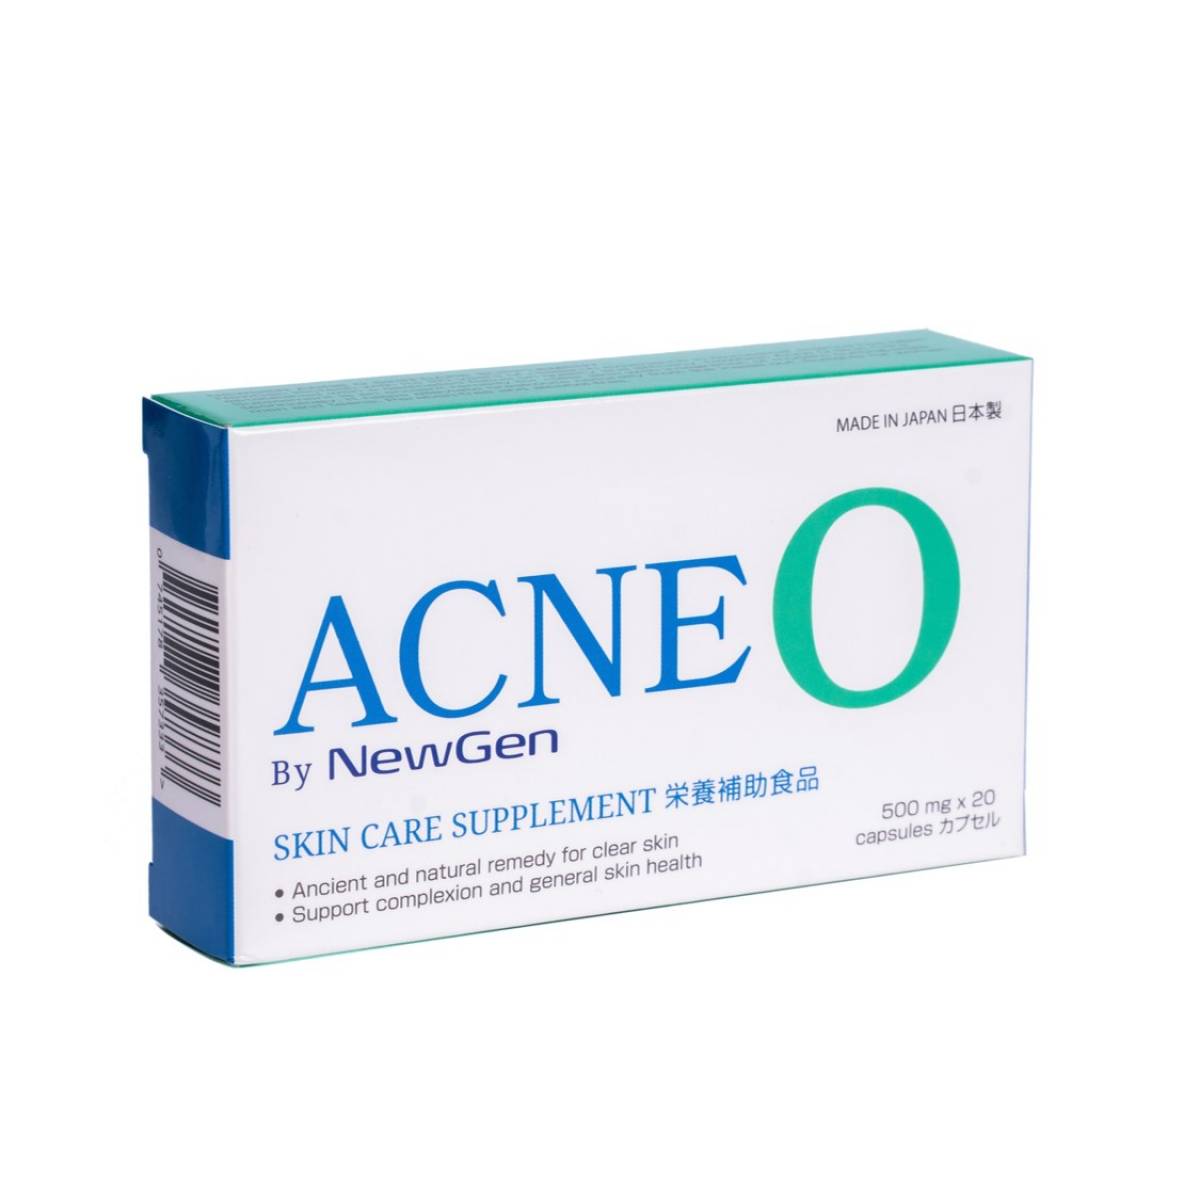 ACNE O Skin Care Supplement (Basic Pack)